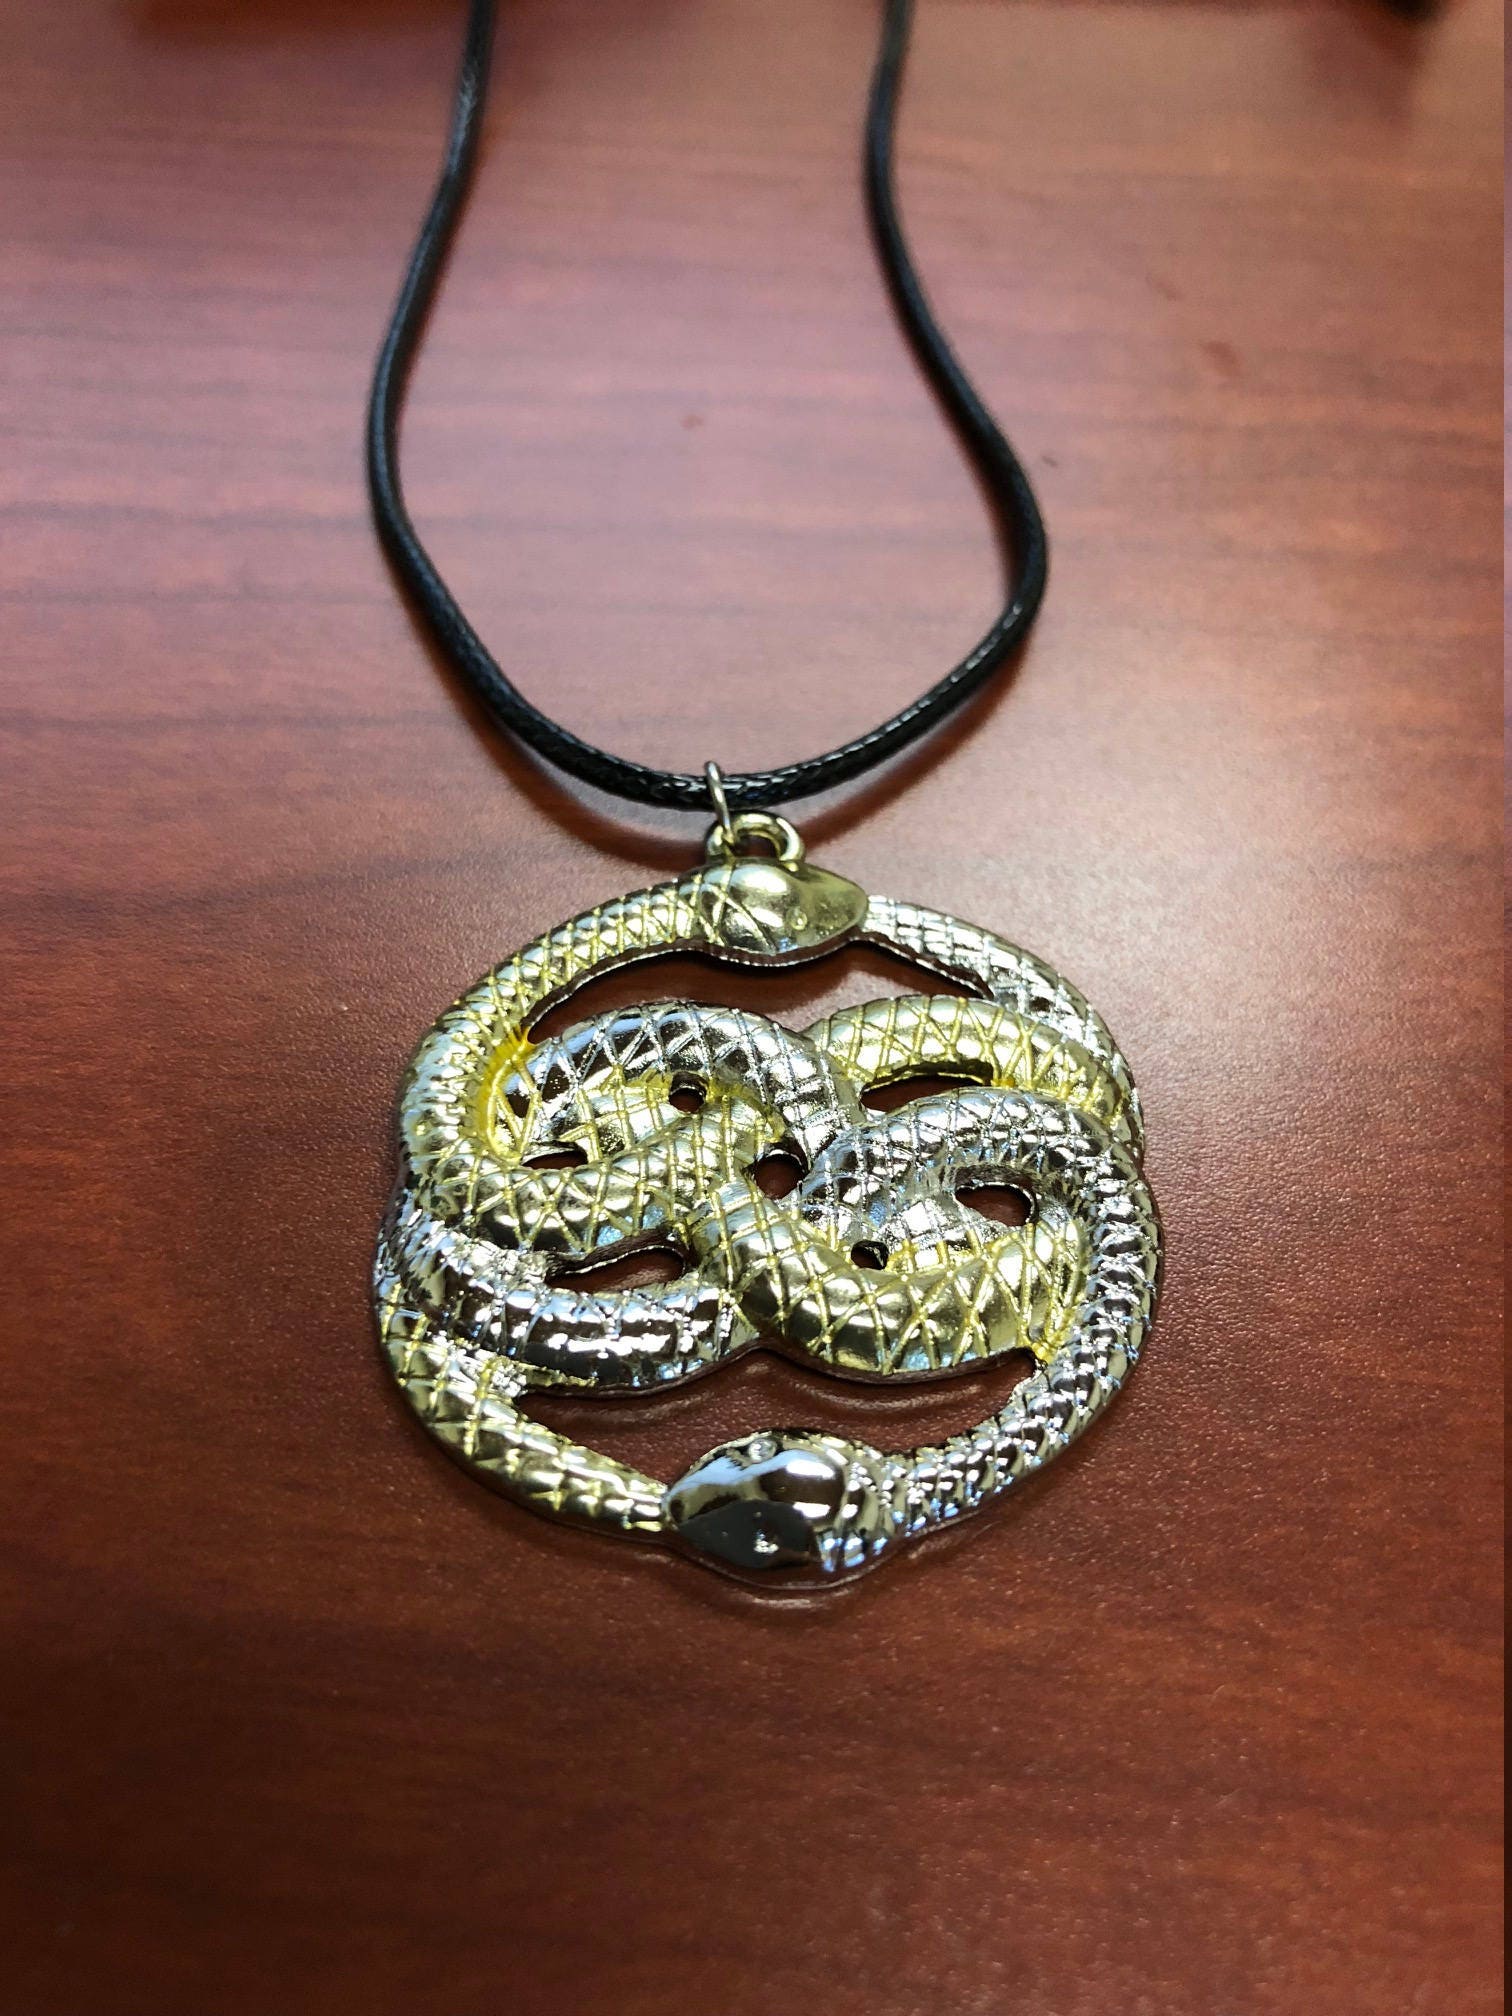 Auryn Handpainted Gold & Silver Amulet Pendant Necklace The Neverending  Story | eBay